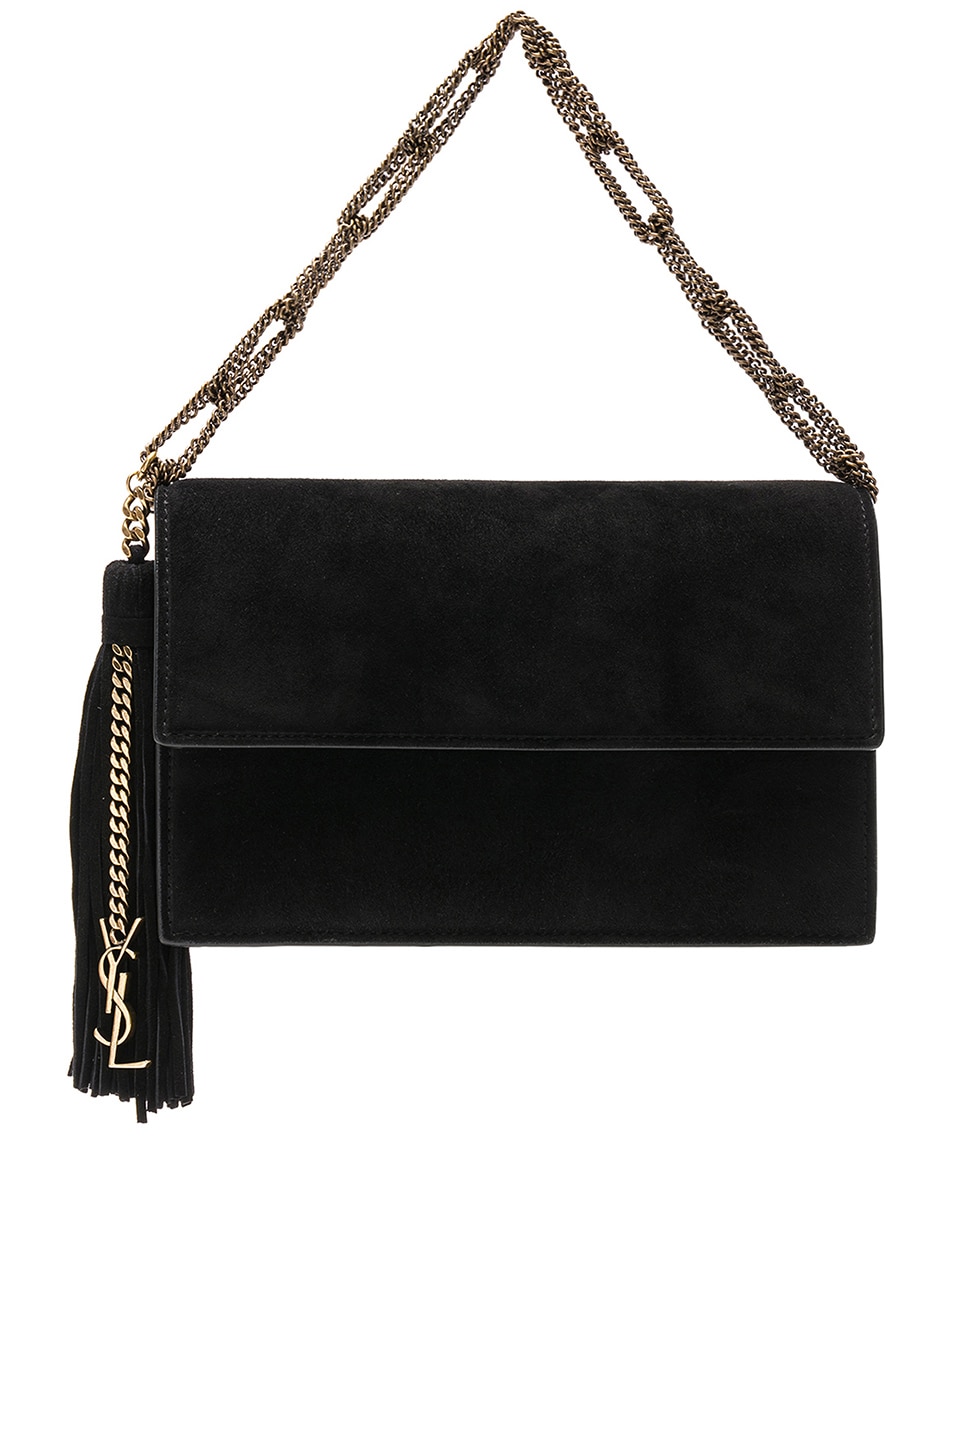 Image 1 of Saint Laurent Small Suede Chain Bag in Black